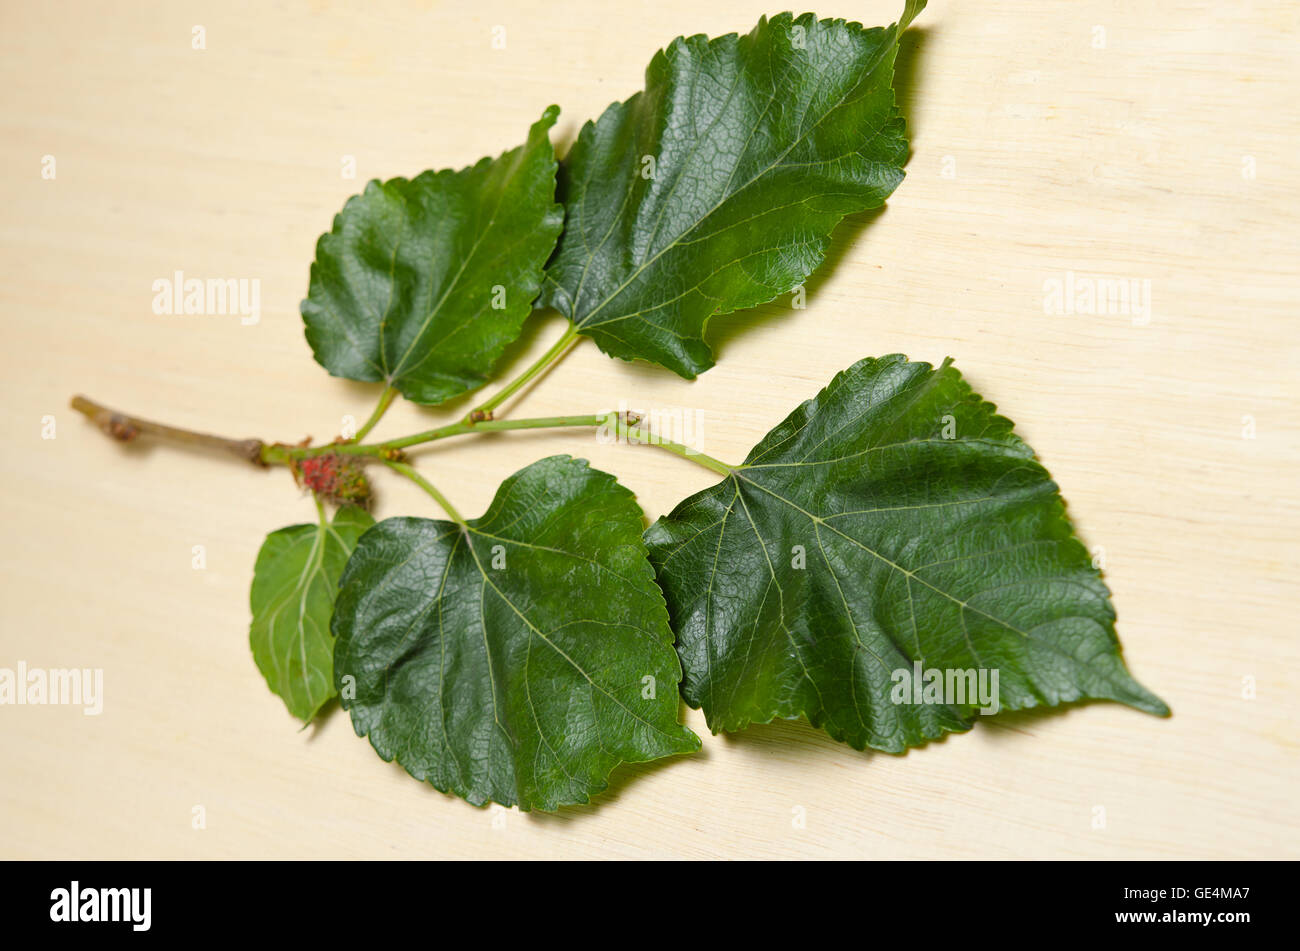 Close-up view of Mulberry (Other names are MORUS ALBA, Moraceae ) leaf over wooden background Stock Photo